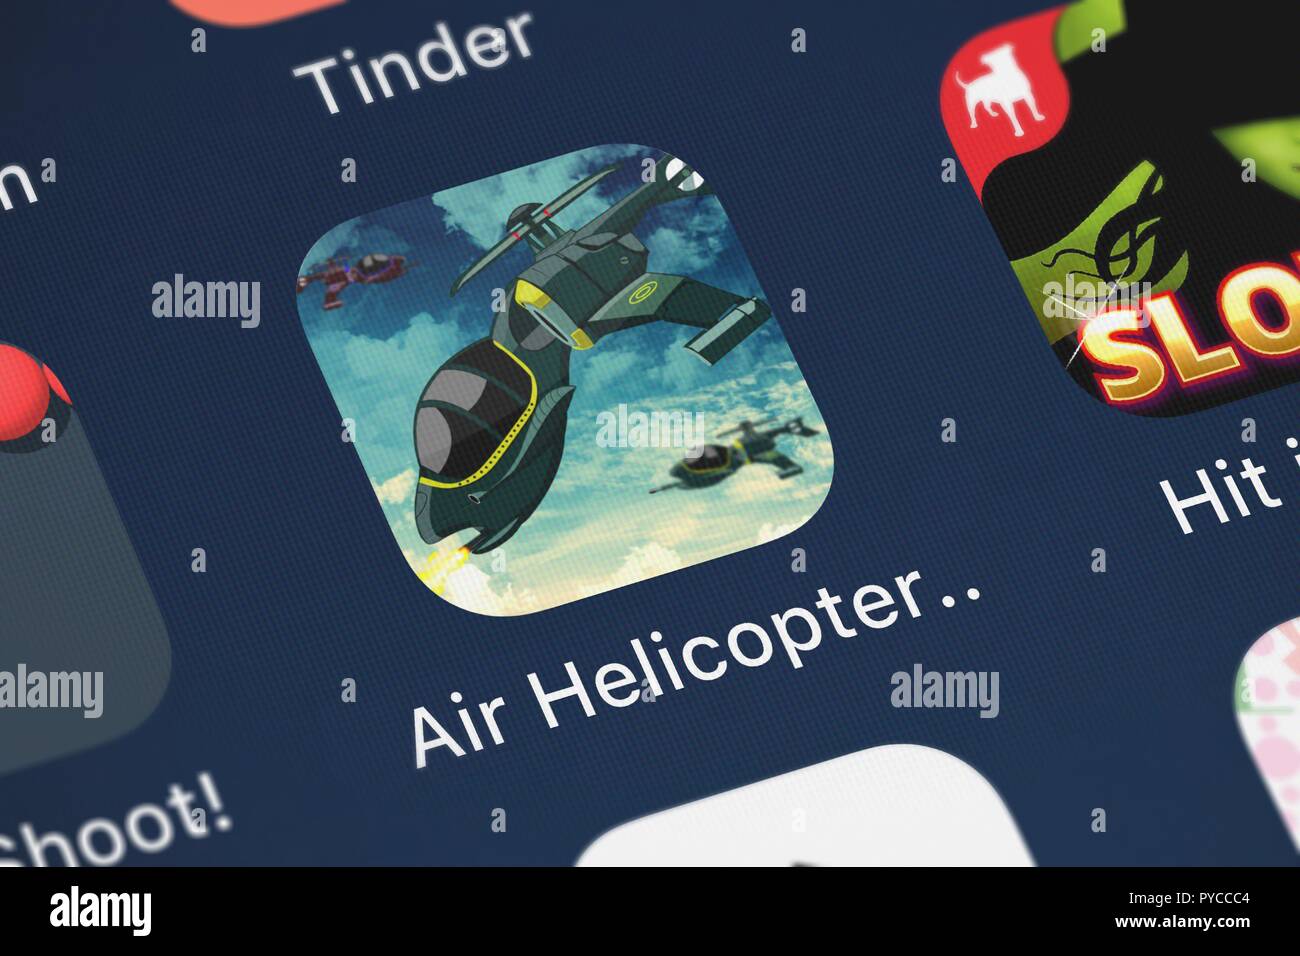 London, United Kingdom - October 26, 2018: Close-up shot of the Air Helicopter Assault Shooter - Top Sky Driving Battle Free mobile app from uTappz Mo Stock Photo